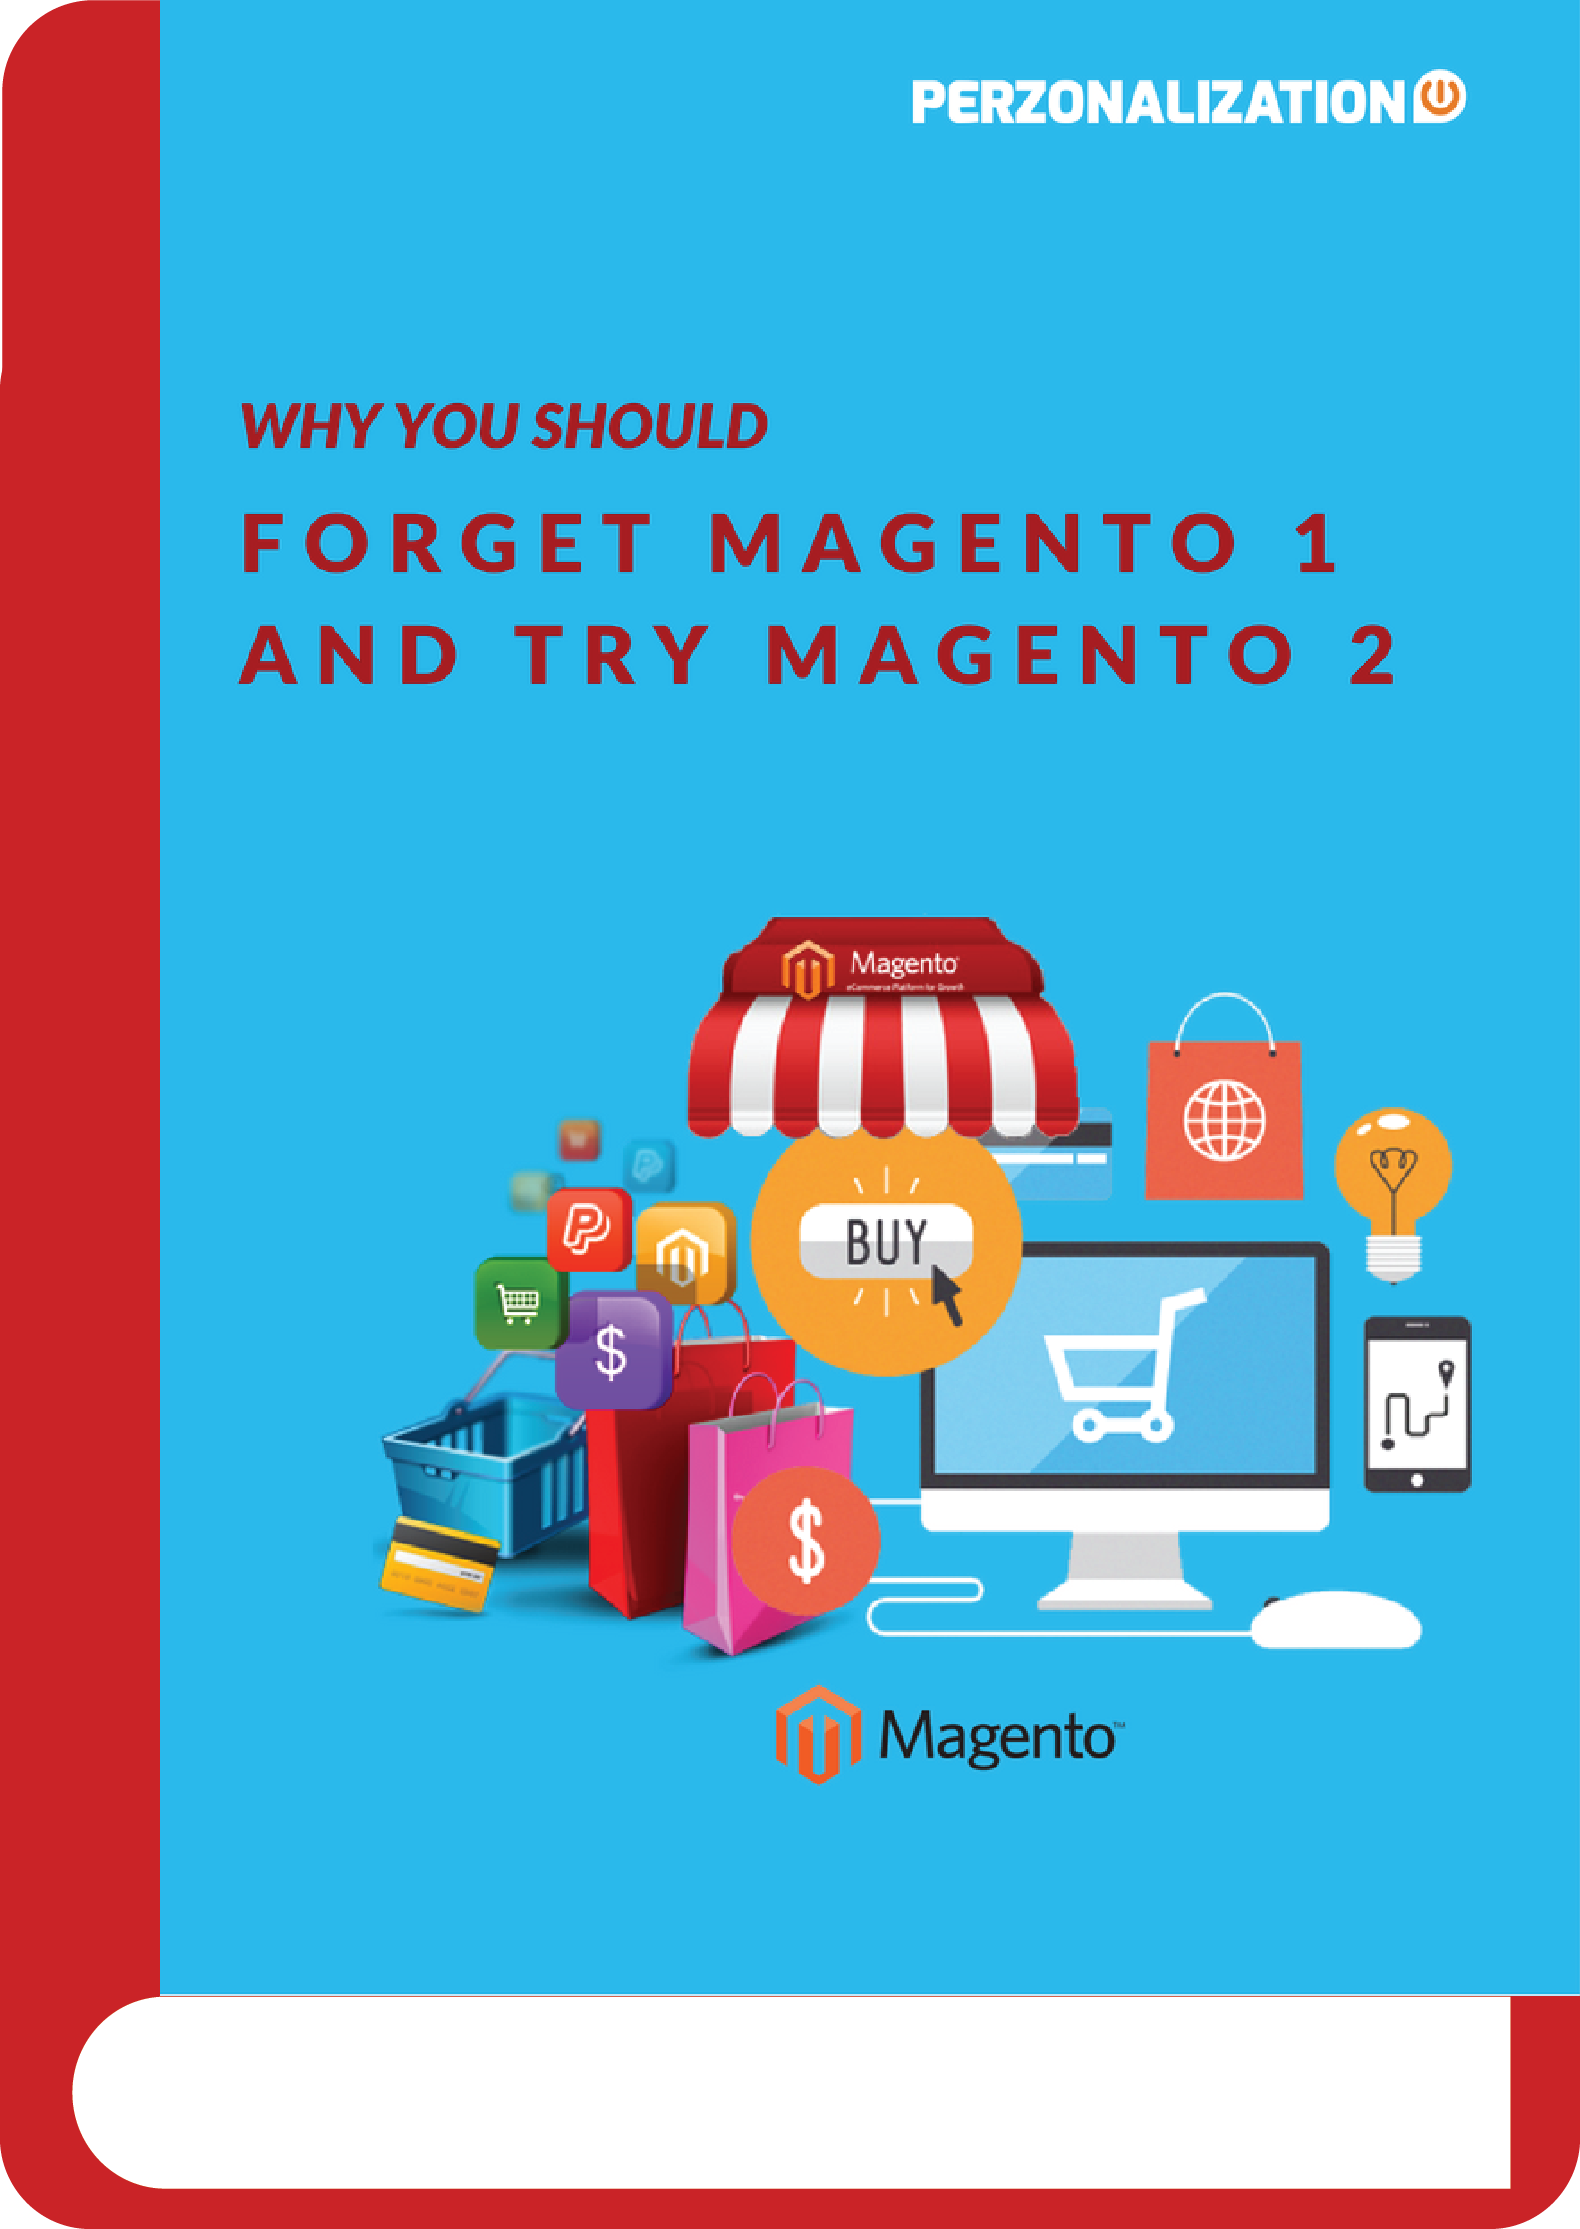 With substantial improvements in performance and usability, Magento 2 has proved to the world that it’s worth a try. Upgrade to Magento 2 today.